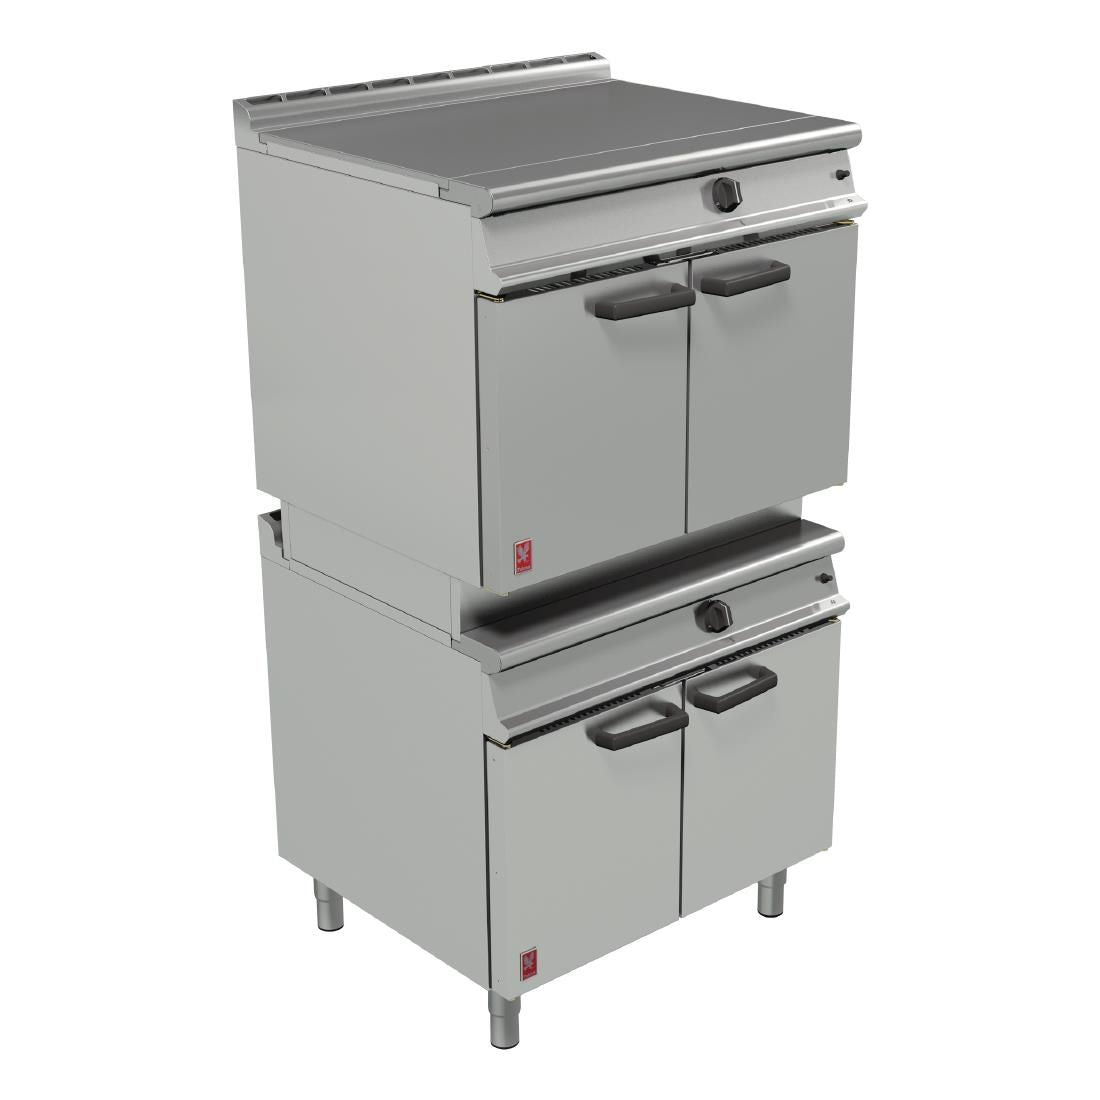 Falcon Dominator Plus Natural/LPG Two Tier General Purpose Oven G3117/2 JD Catering Equipment Solutions Ltd